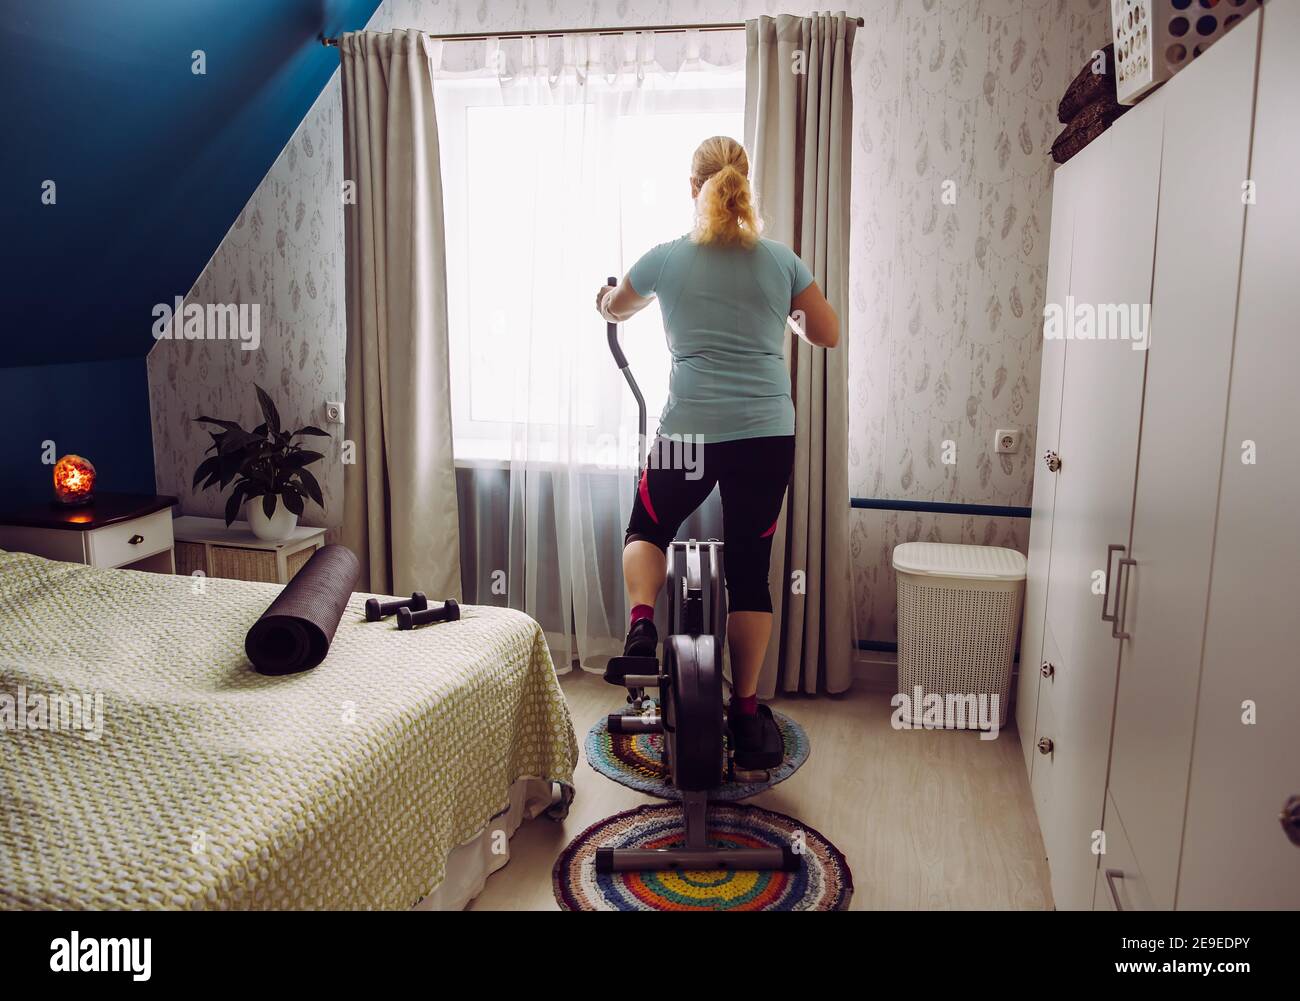 Overweight woman do workout with elliptical trainer at home during quarantine and look out the window. Time for self improvement concept. Stock Photo